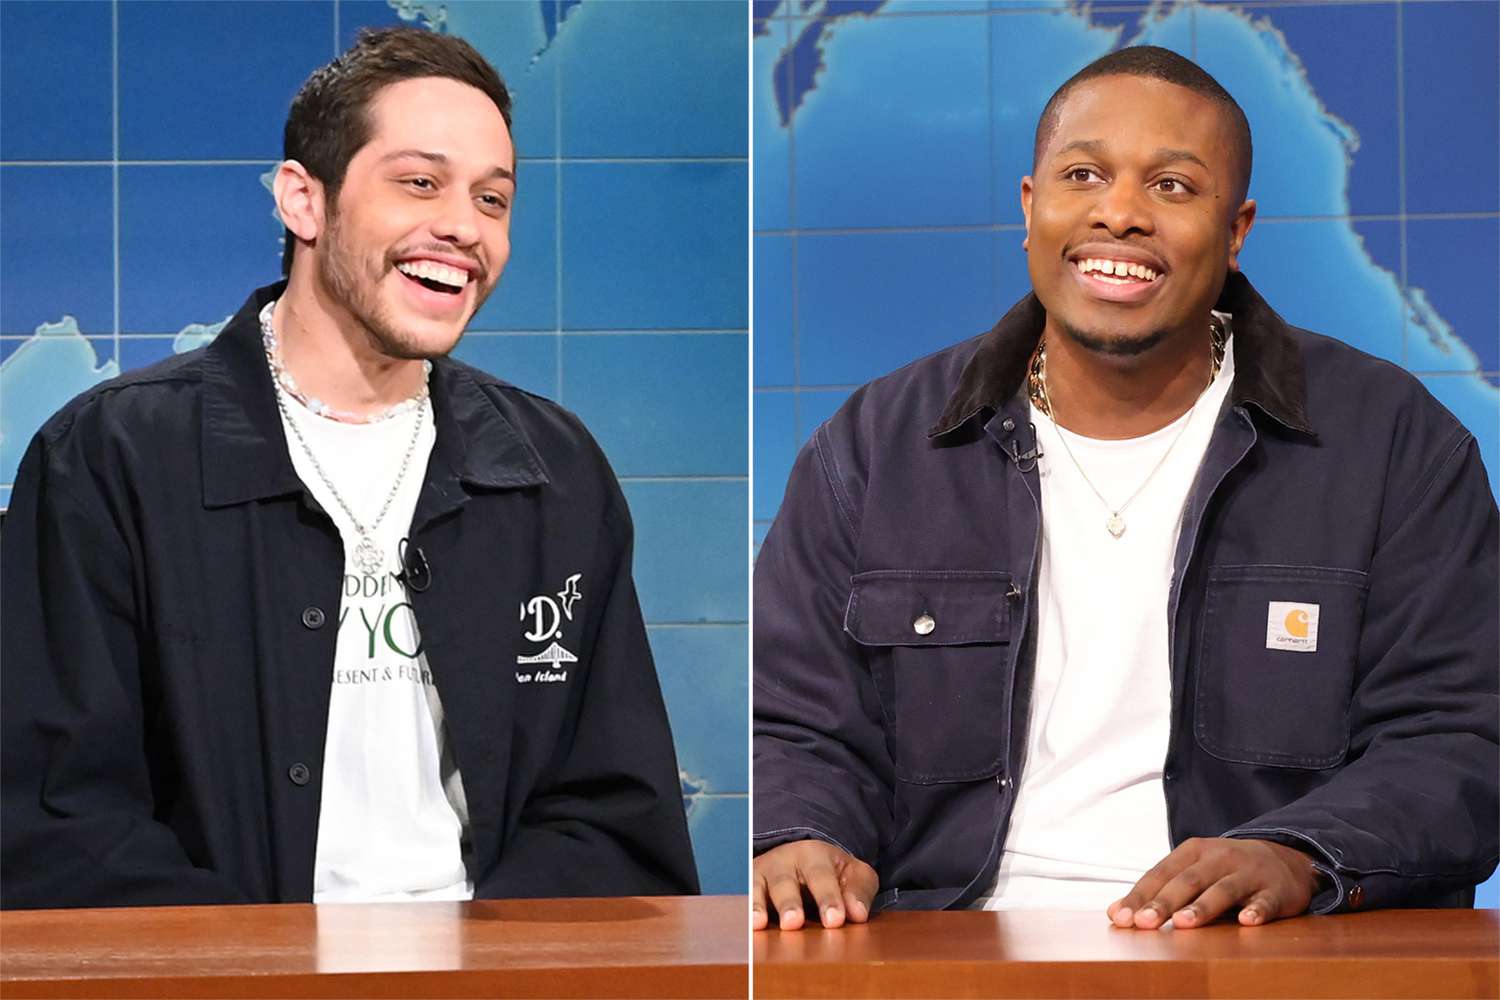 SATURDAY NIGHT LIVE -- Natasha Lyonne, Japanese Breakfast Episode 1826 -- Pictured: (l-r) Pete Davidson and anchor Colin Jost during Weekend Update on Saturday, May 21, 2022, SATURDAY NIGHT LIVE -- Megan Thee Stallion Episode 1829 -- Pictured: (l-r) Anchor Michael Che and Devon Walker during Weekend Update on Saturday, October 15, 2022